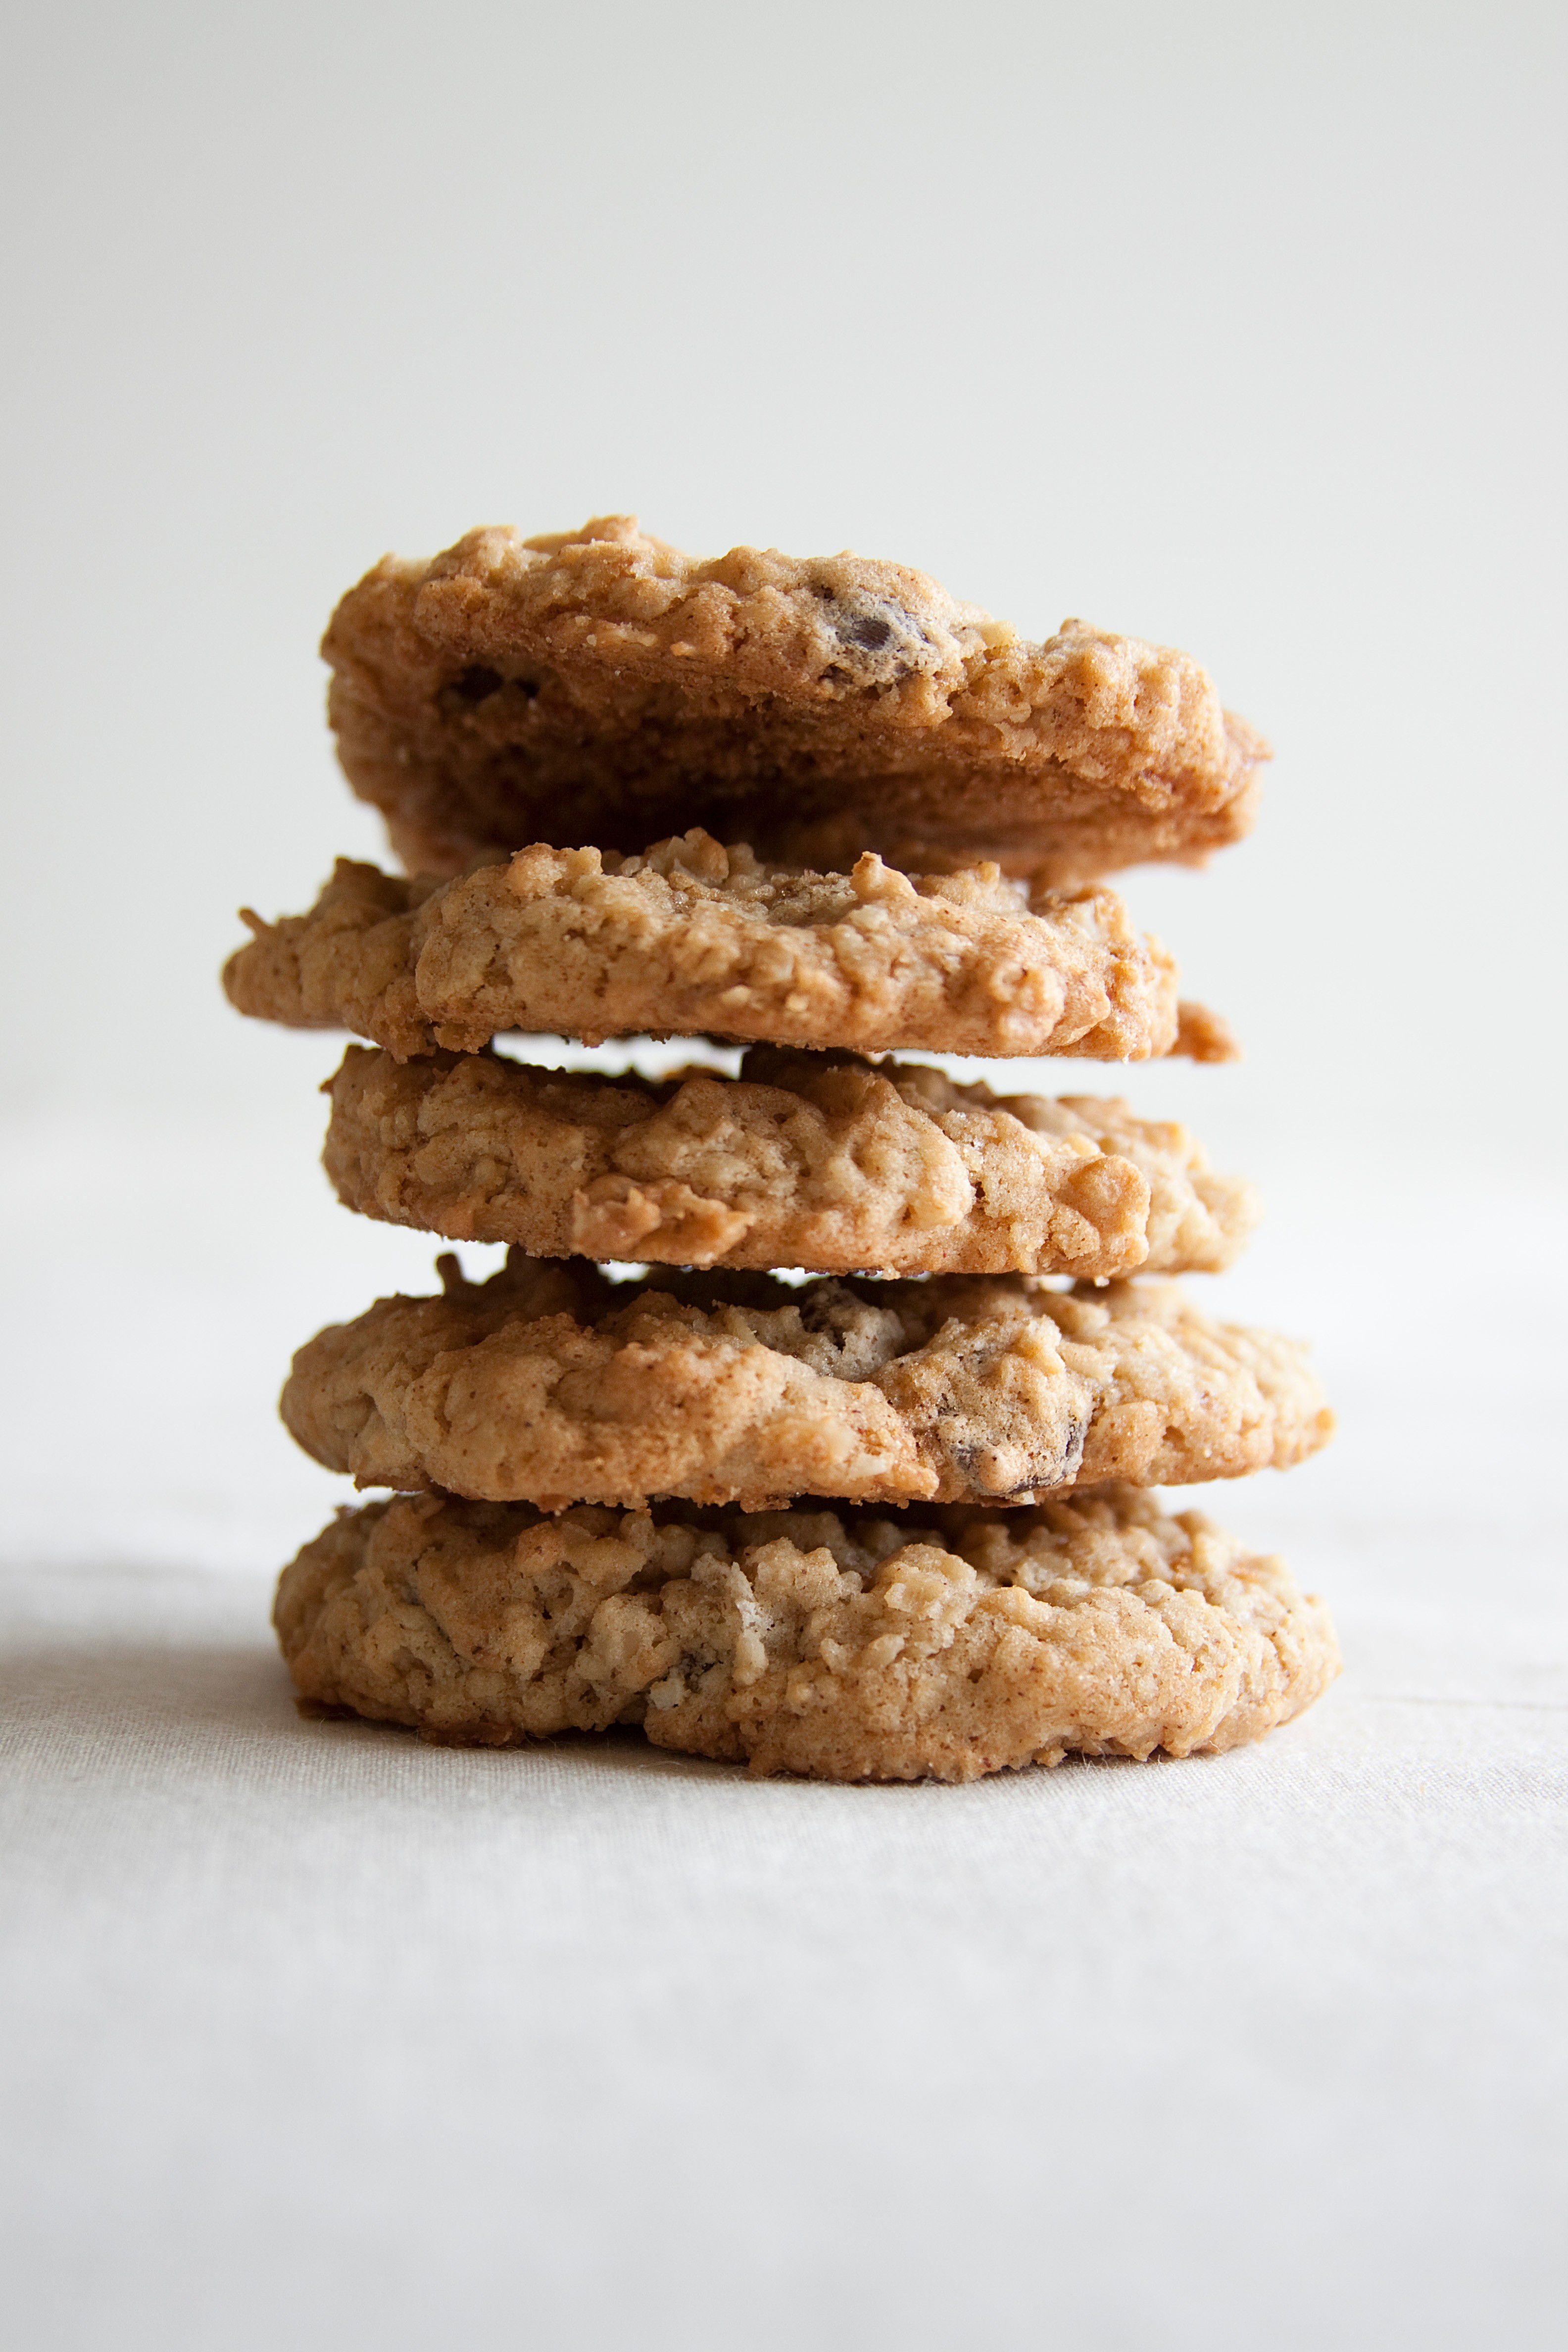 A stack of five oatmeal cookies.